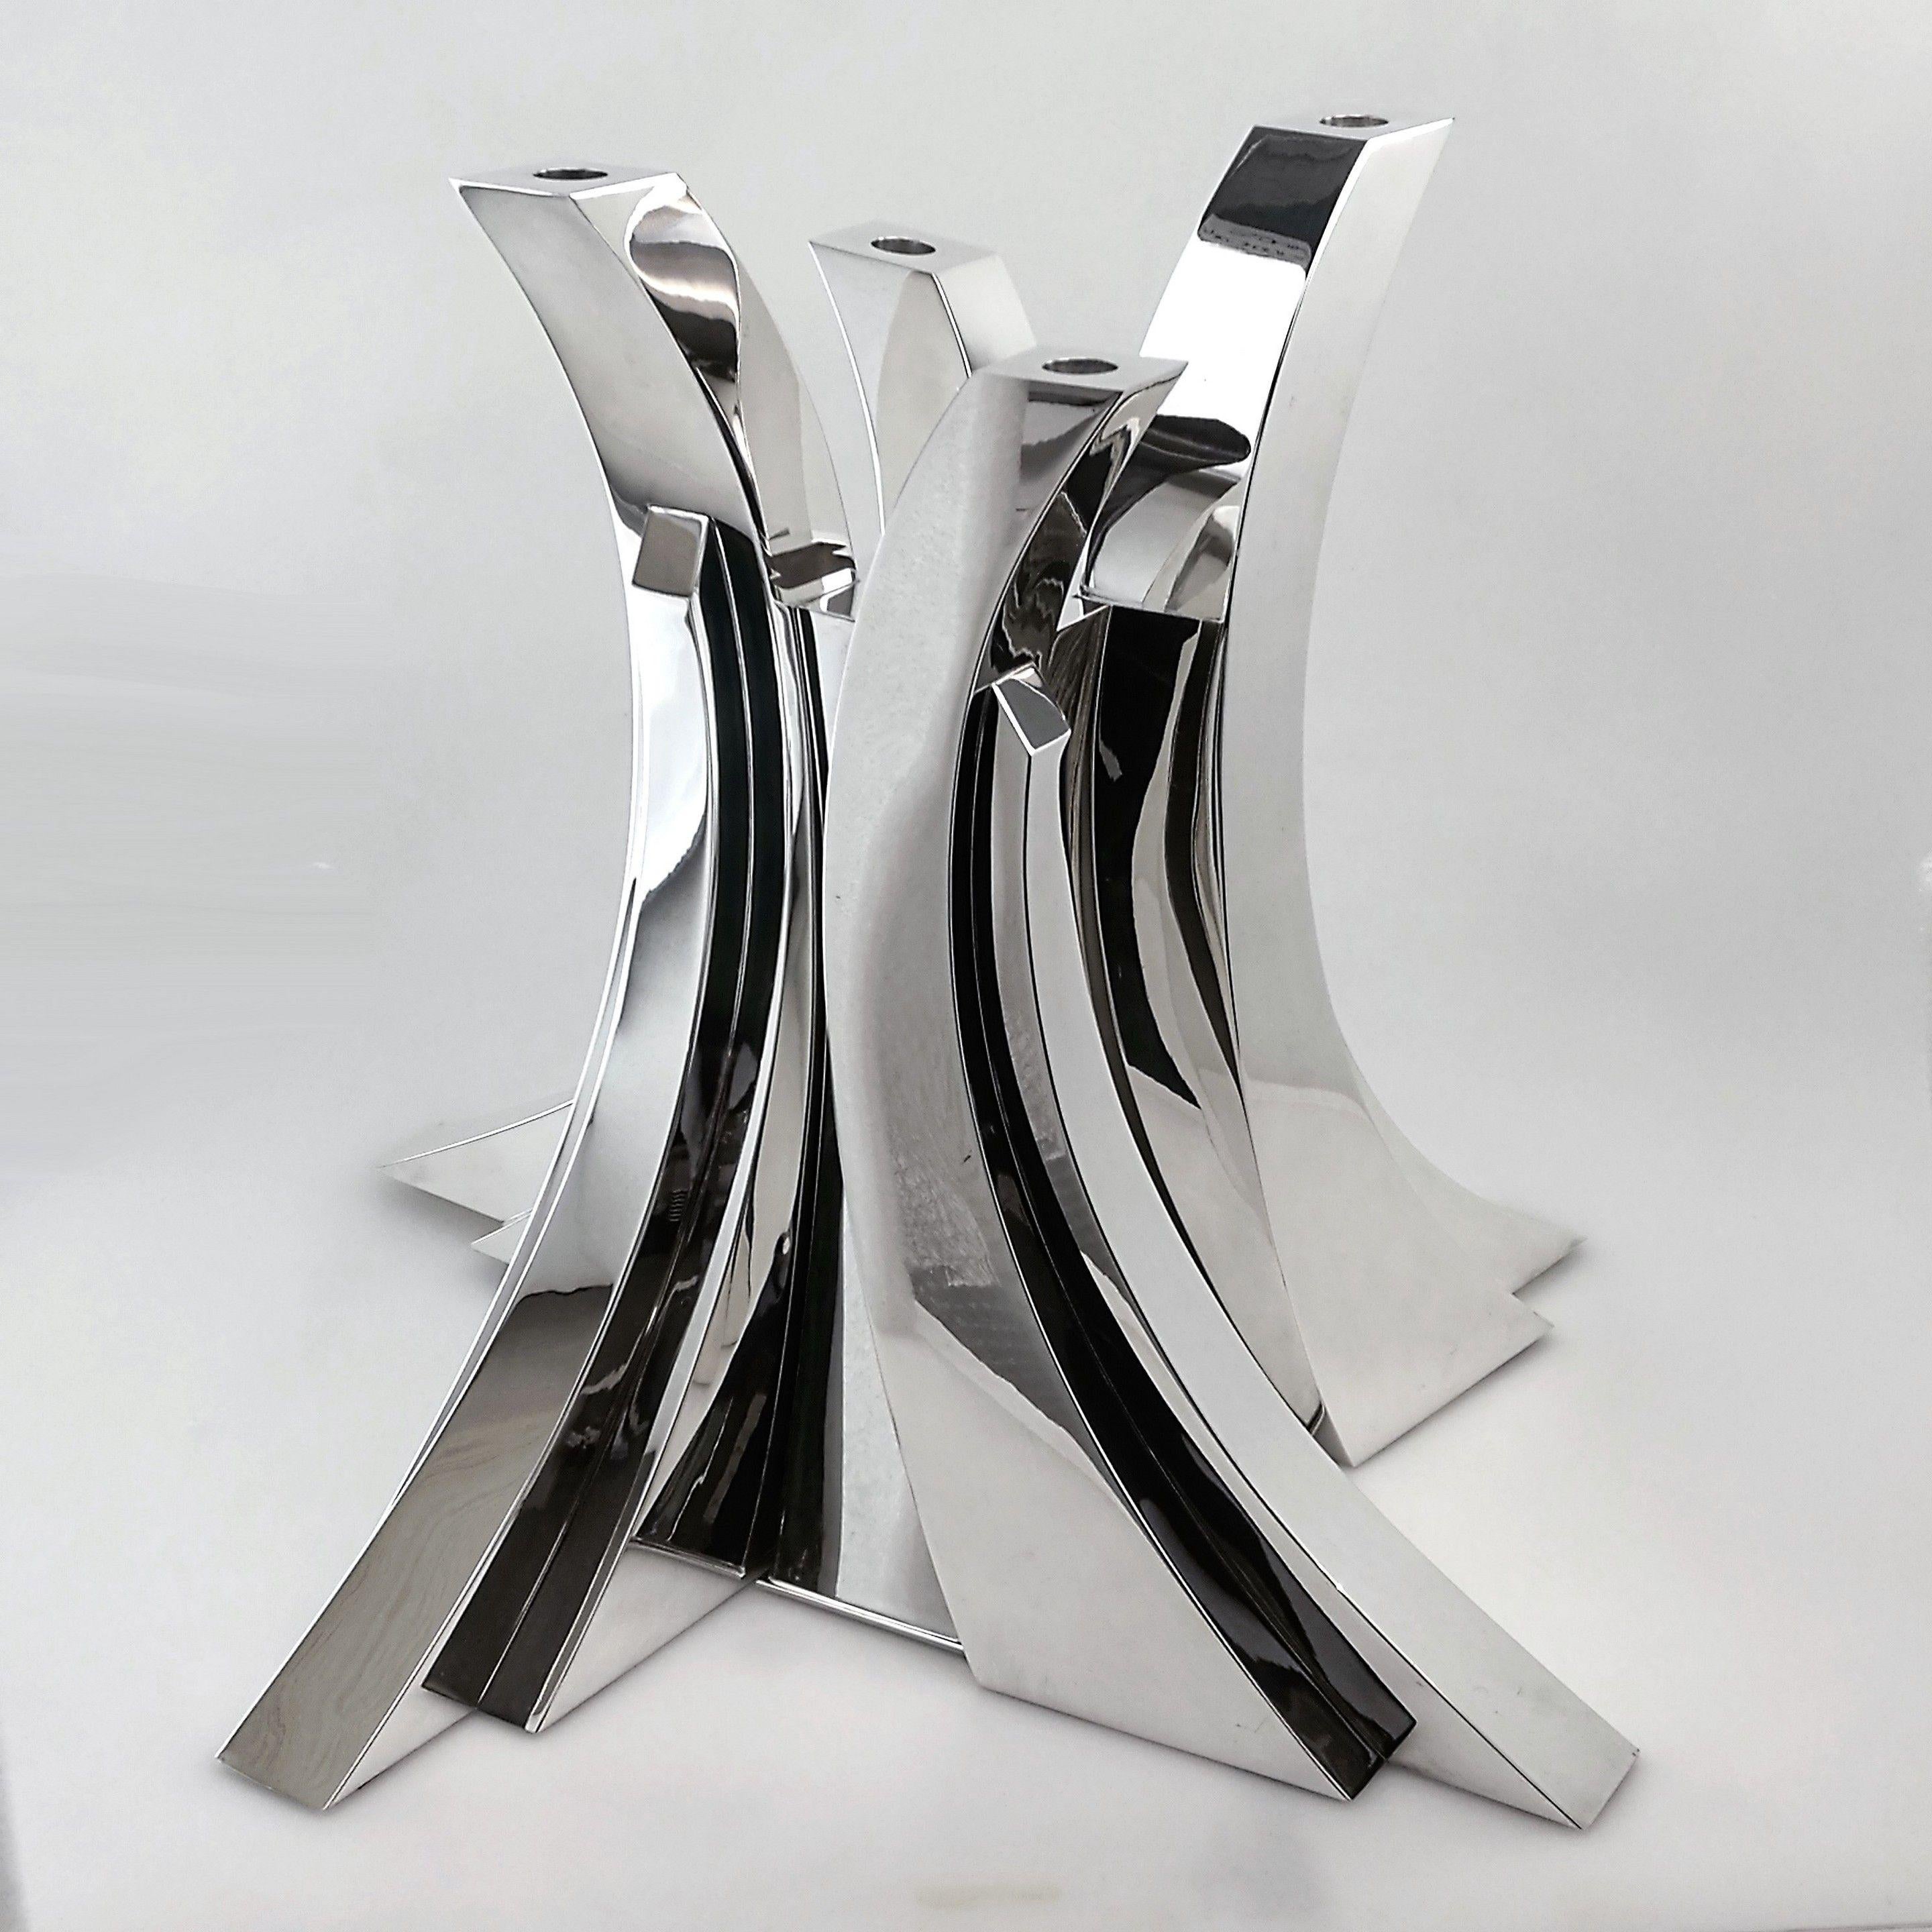 A spectacular modernist Sculptural Centrepiece made by Damian Garrido. This magnificent Centrepiece is made up of four magnificent curved Candlesticks that fit into a central Vase. Each of these pieces can be used alone or in any number of